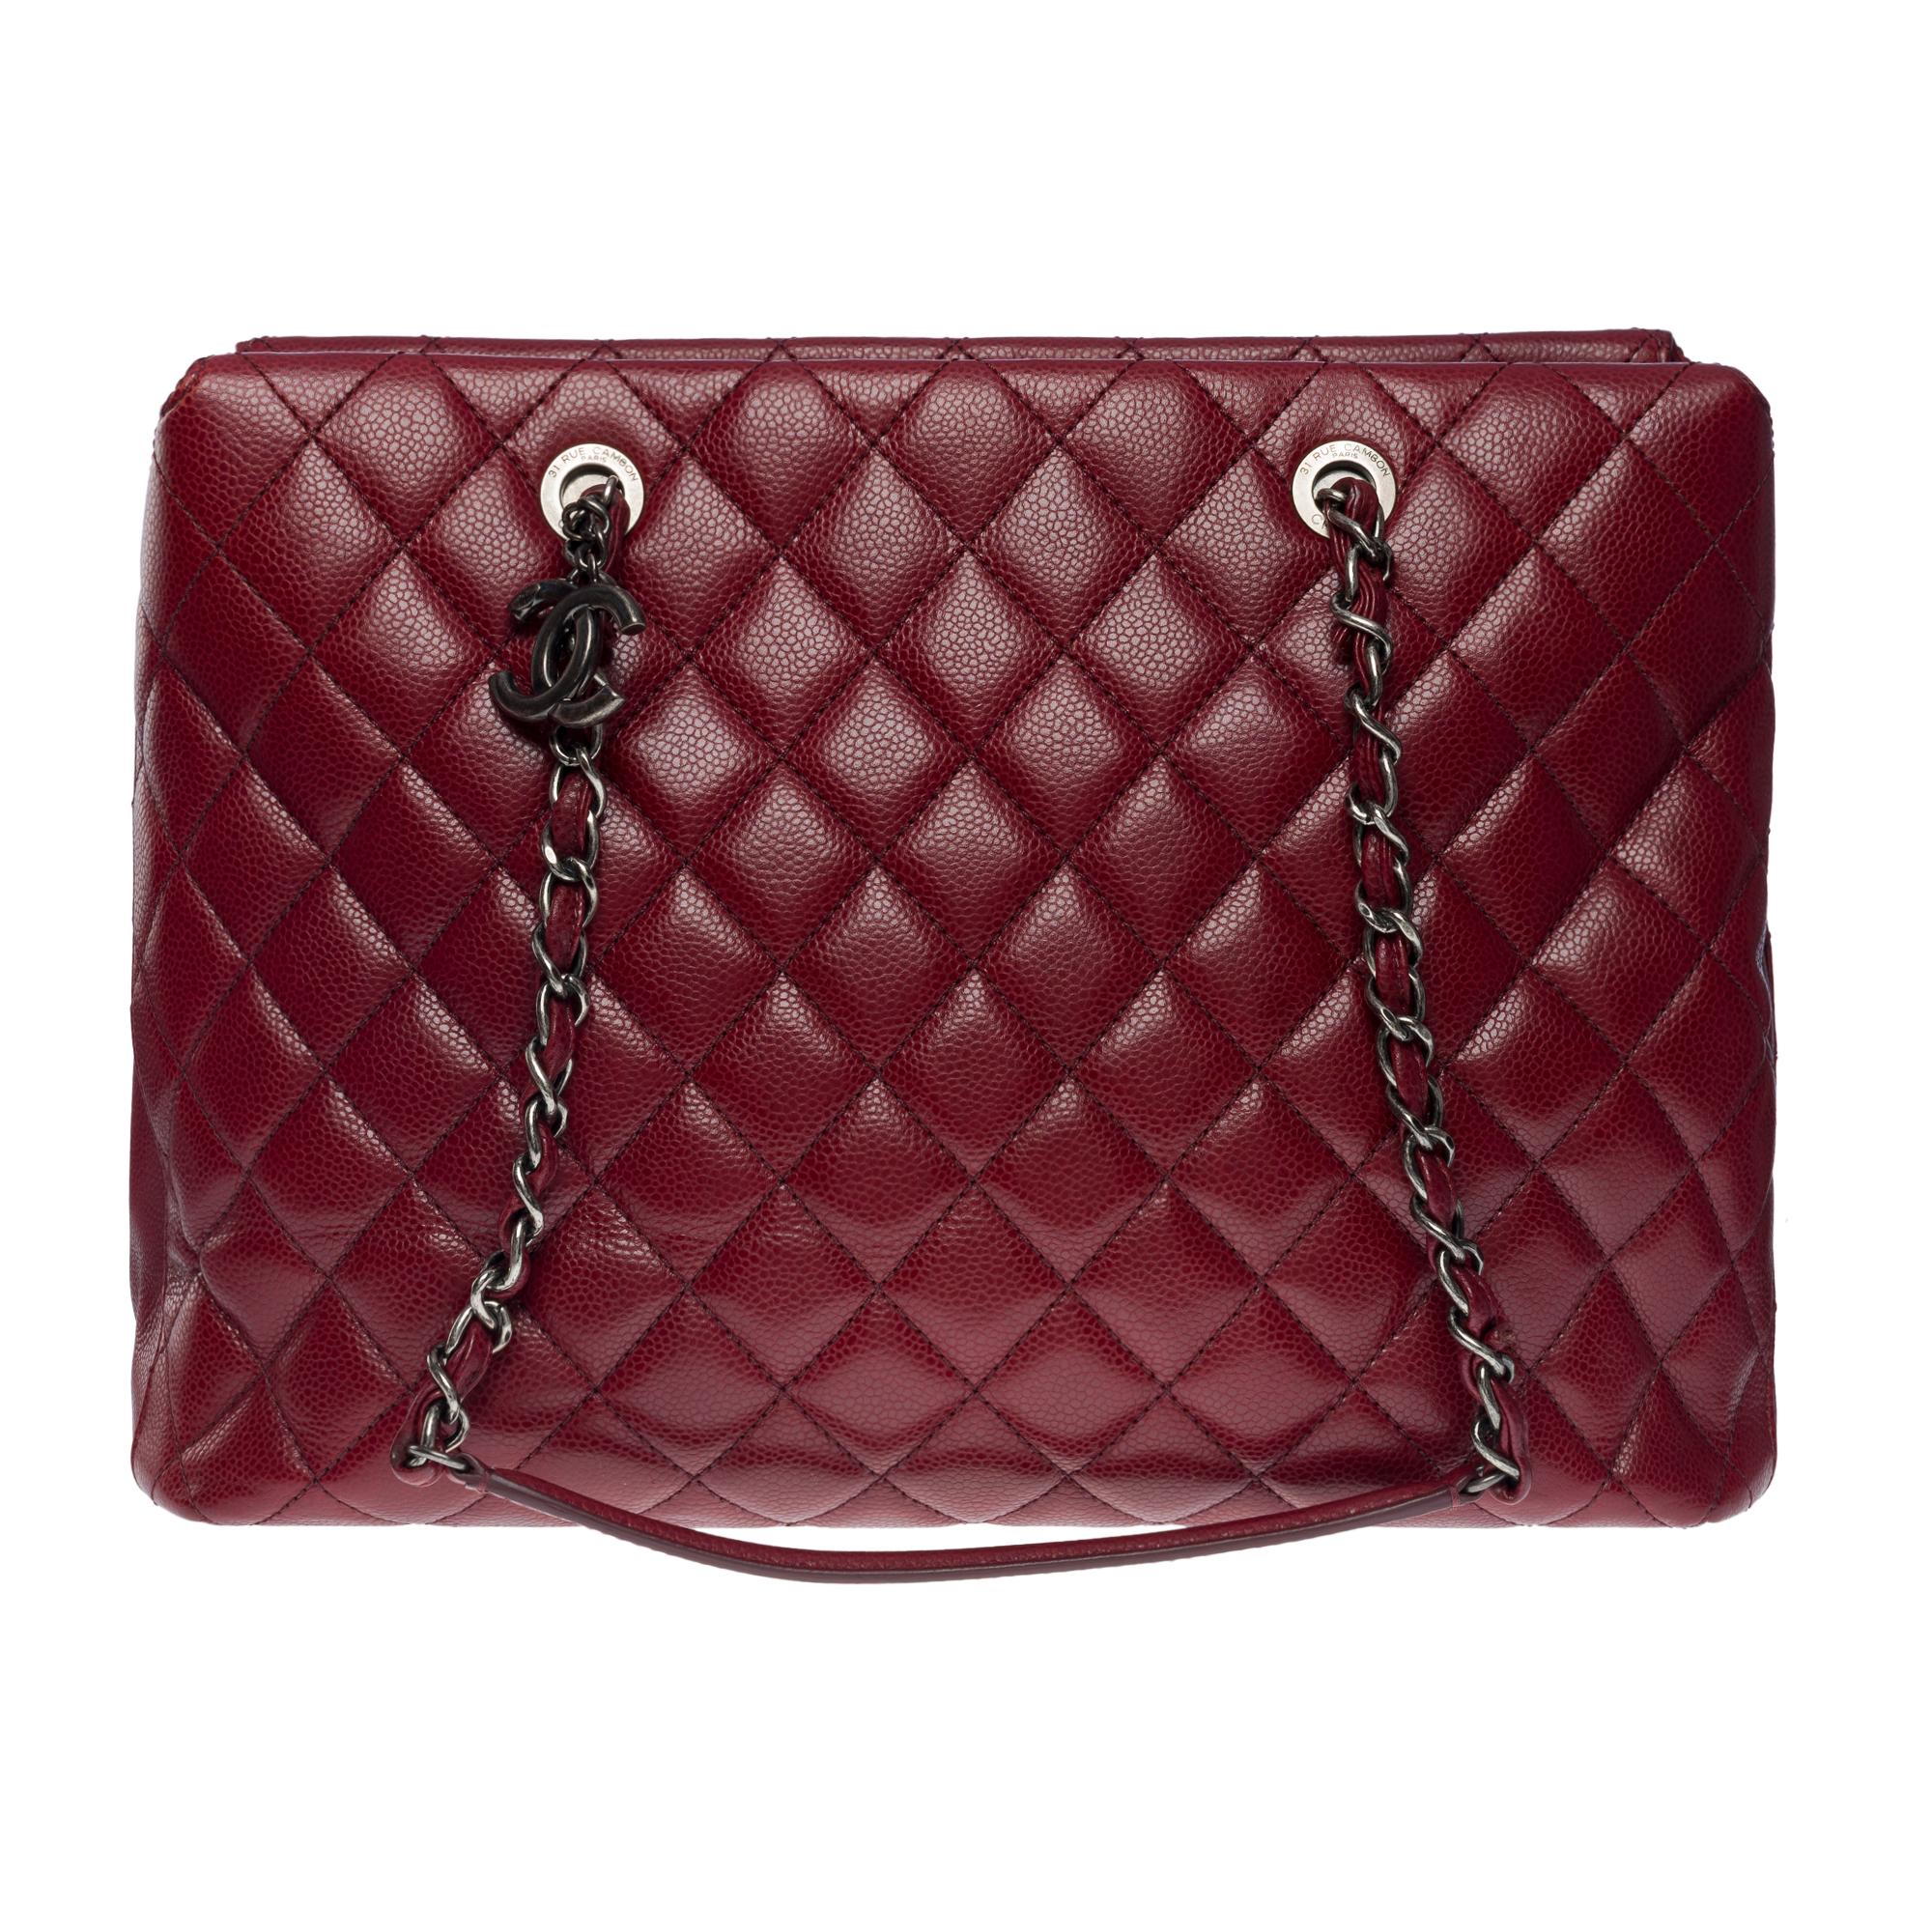 Gorgeous Cabas Chanel Shopping Tote bag in burgundy caviar leather, ruthenium metal hardware, double ruthenium metal handle interwoven with burgundy leather for a hand and shoulder carry

Backpack pocket
Burgundy interior lining, 4 interior